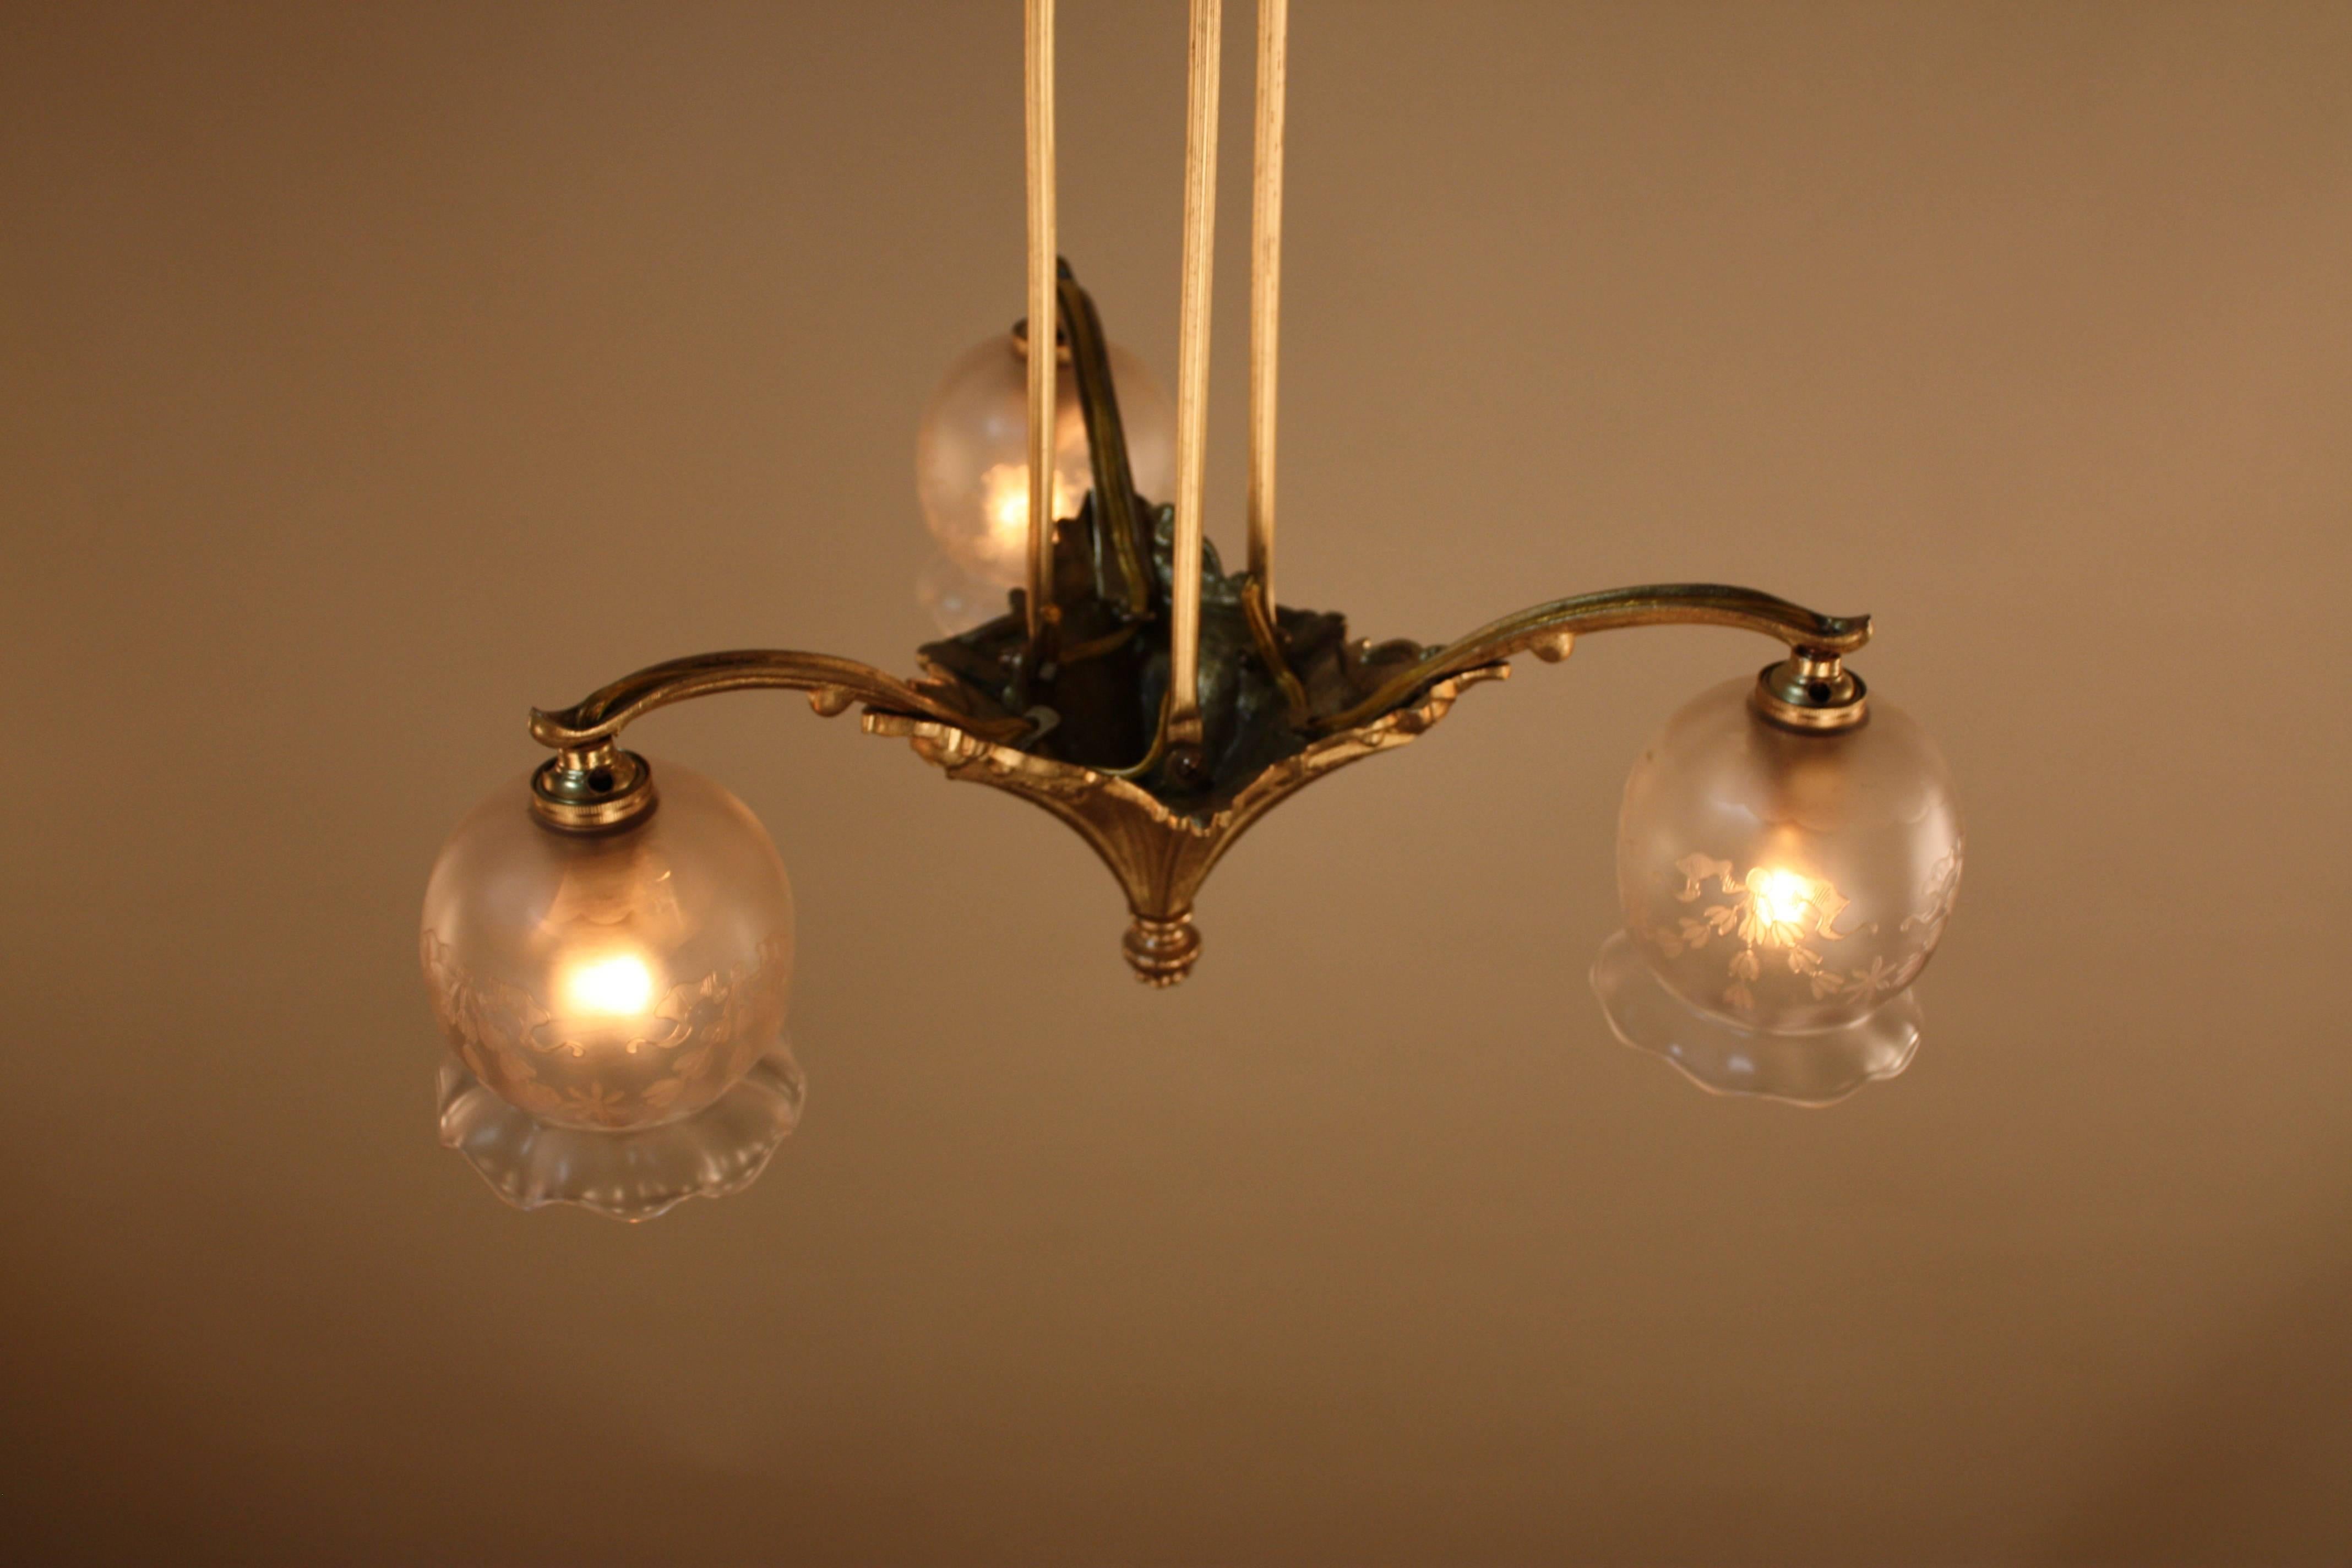 French, 1920s three-light bronze chandelier with etched glass shades.